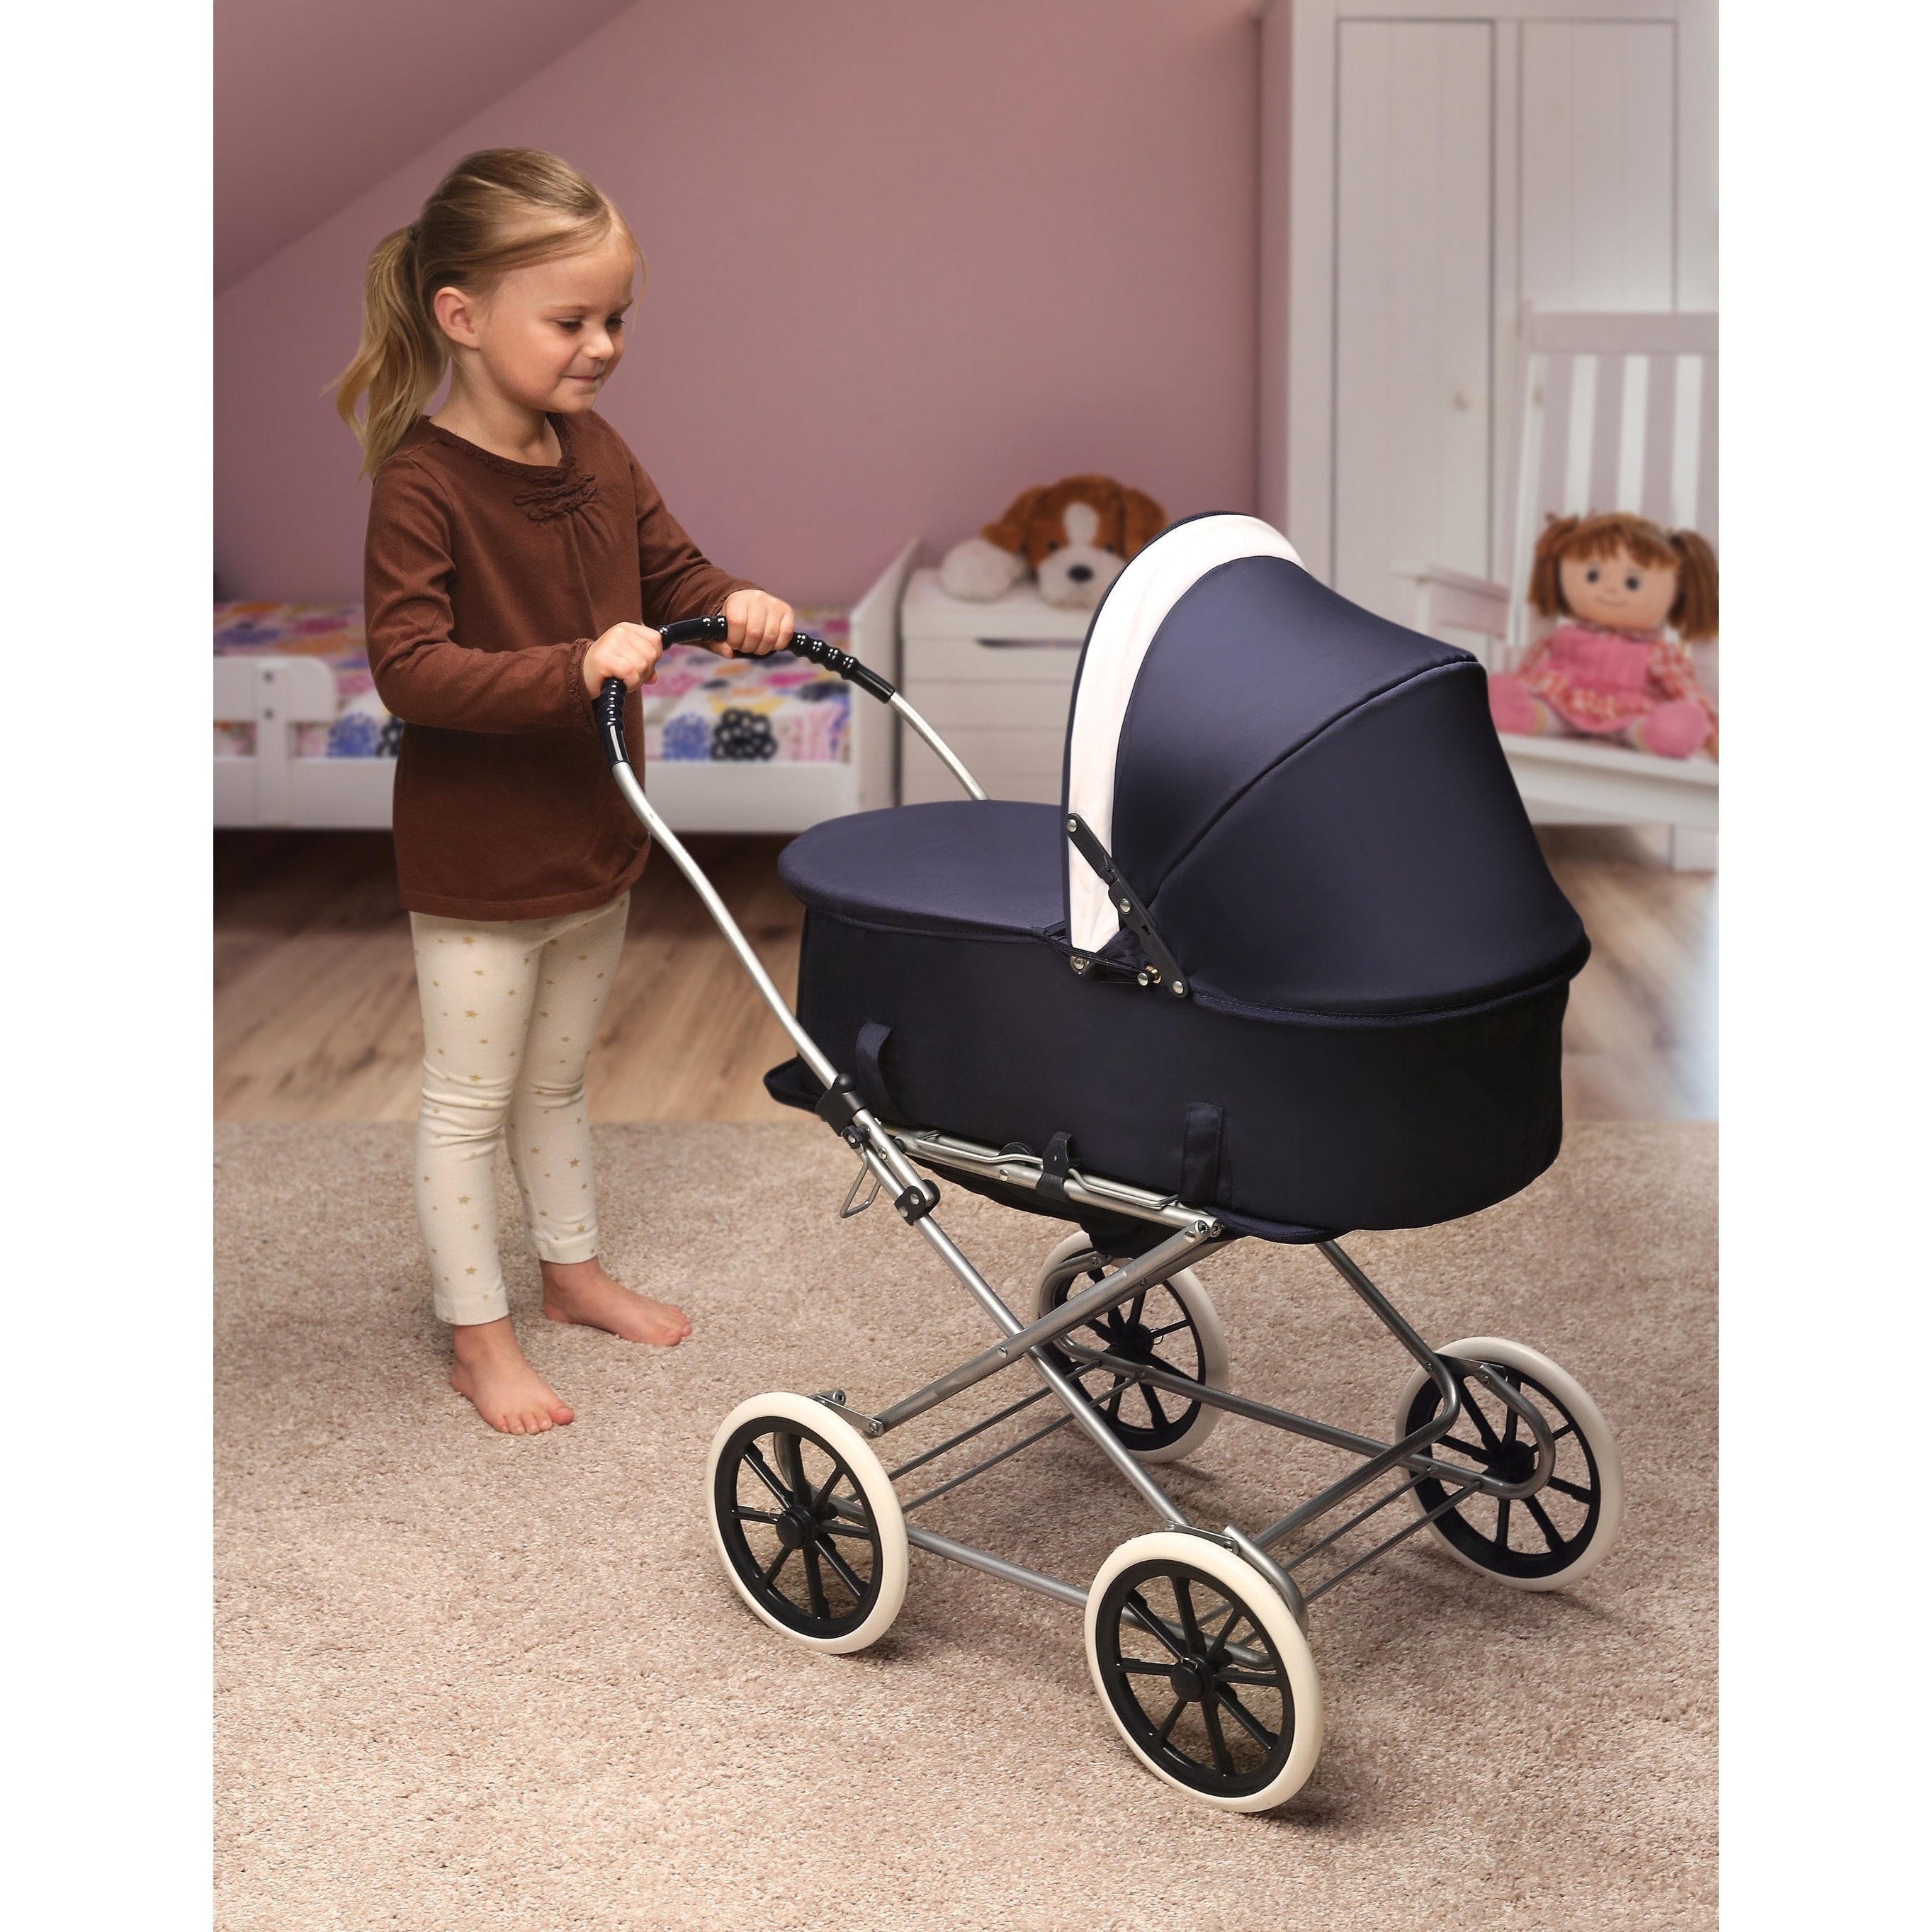 doll and pram for 1 year old